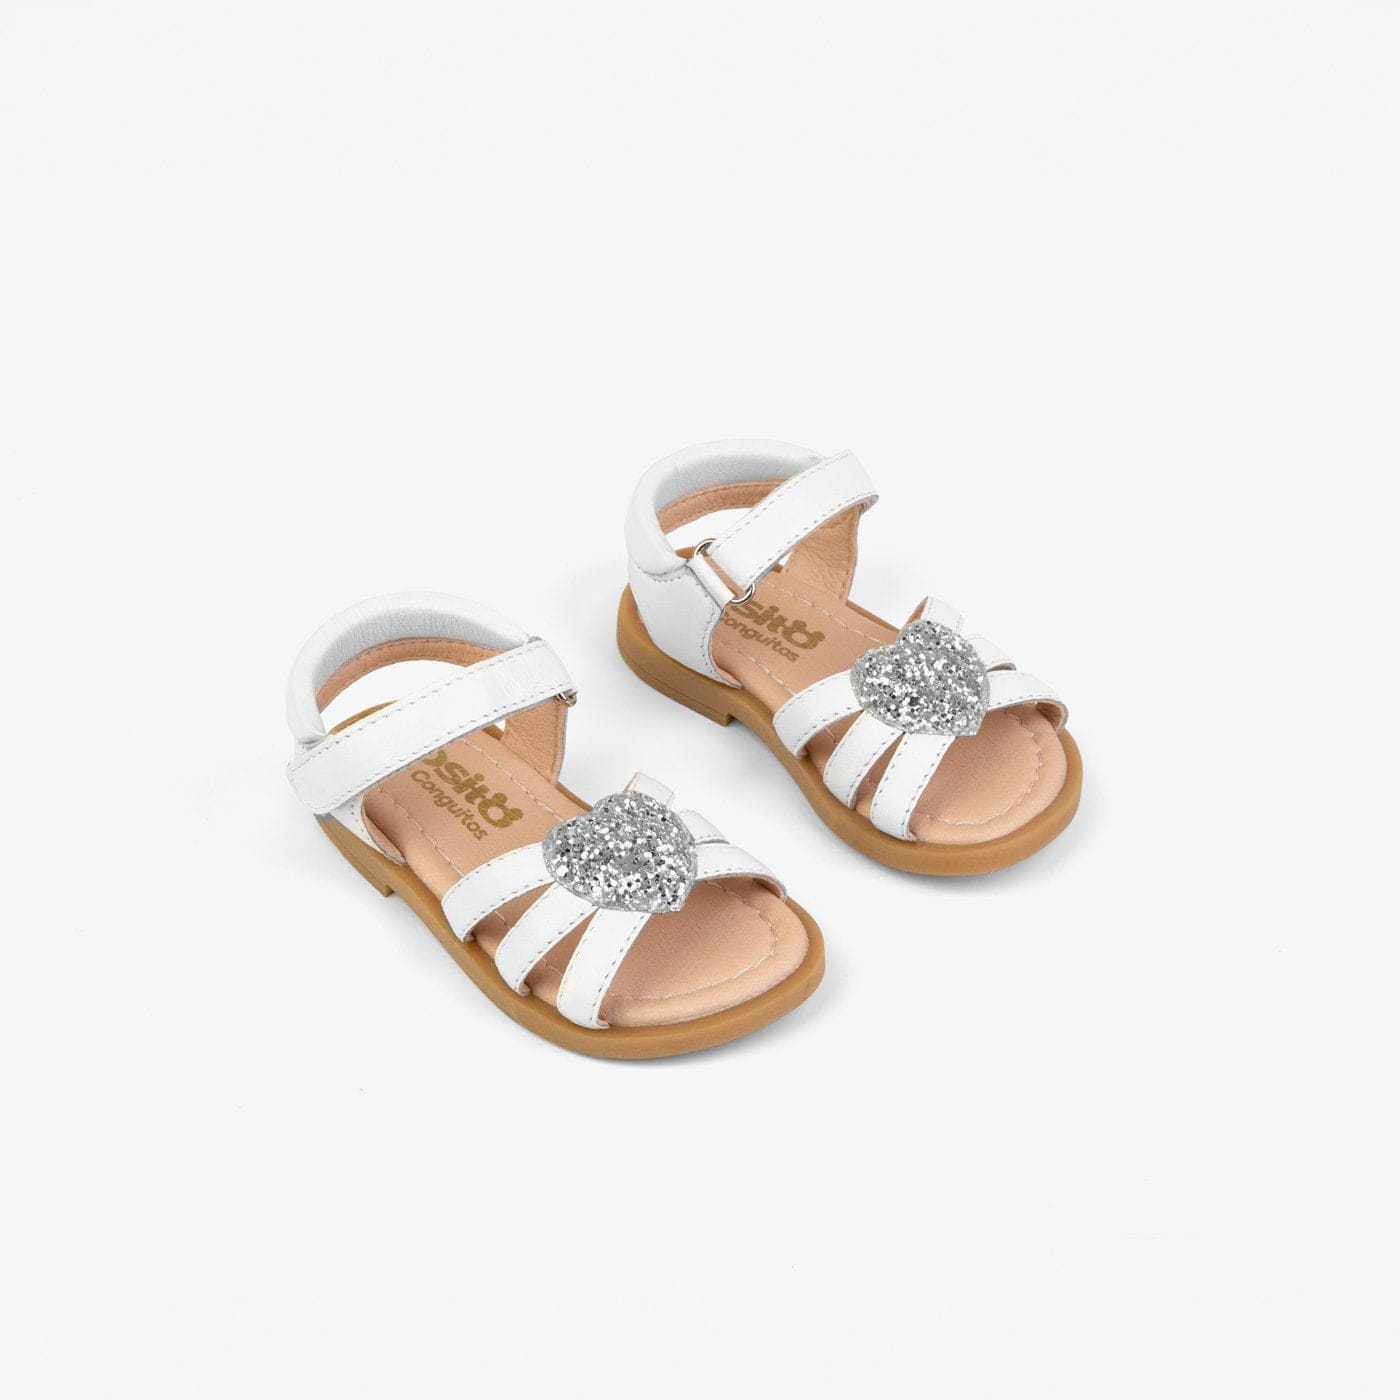 OSITO Shoes Baby's White Heart Leather Sandals